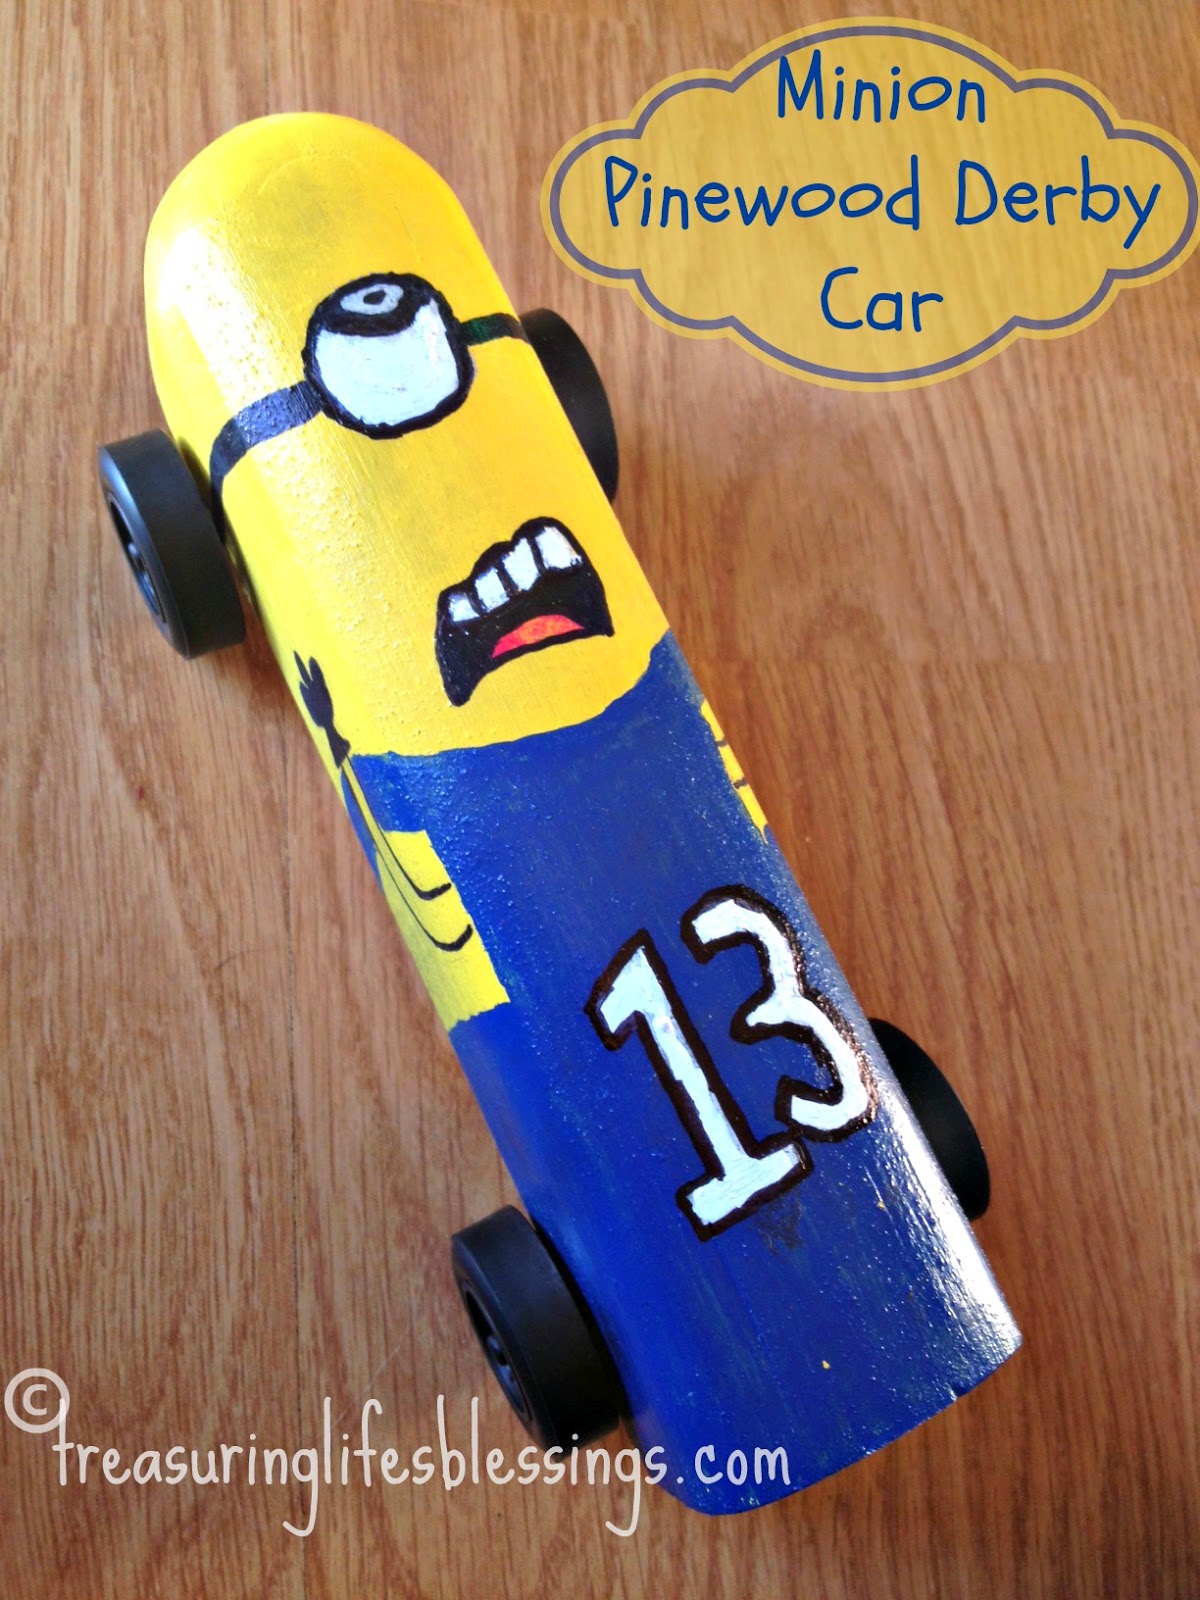 minion-pinewood-derby-car-treasuring-life-s-blessings